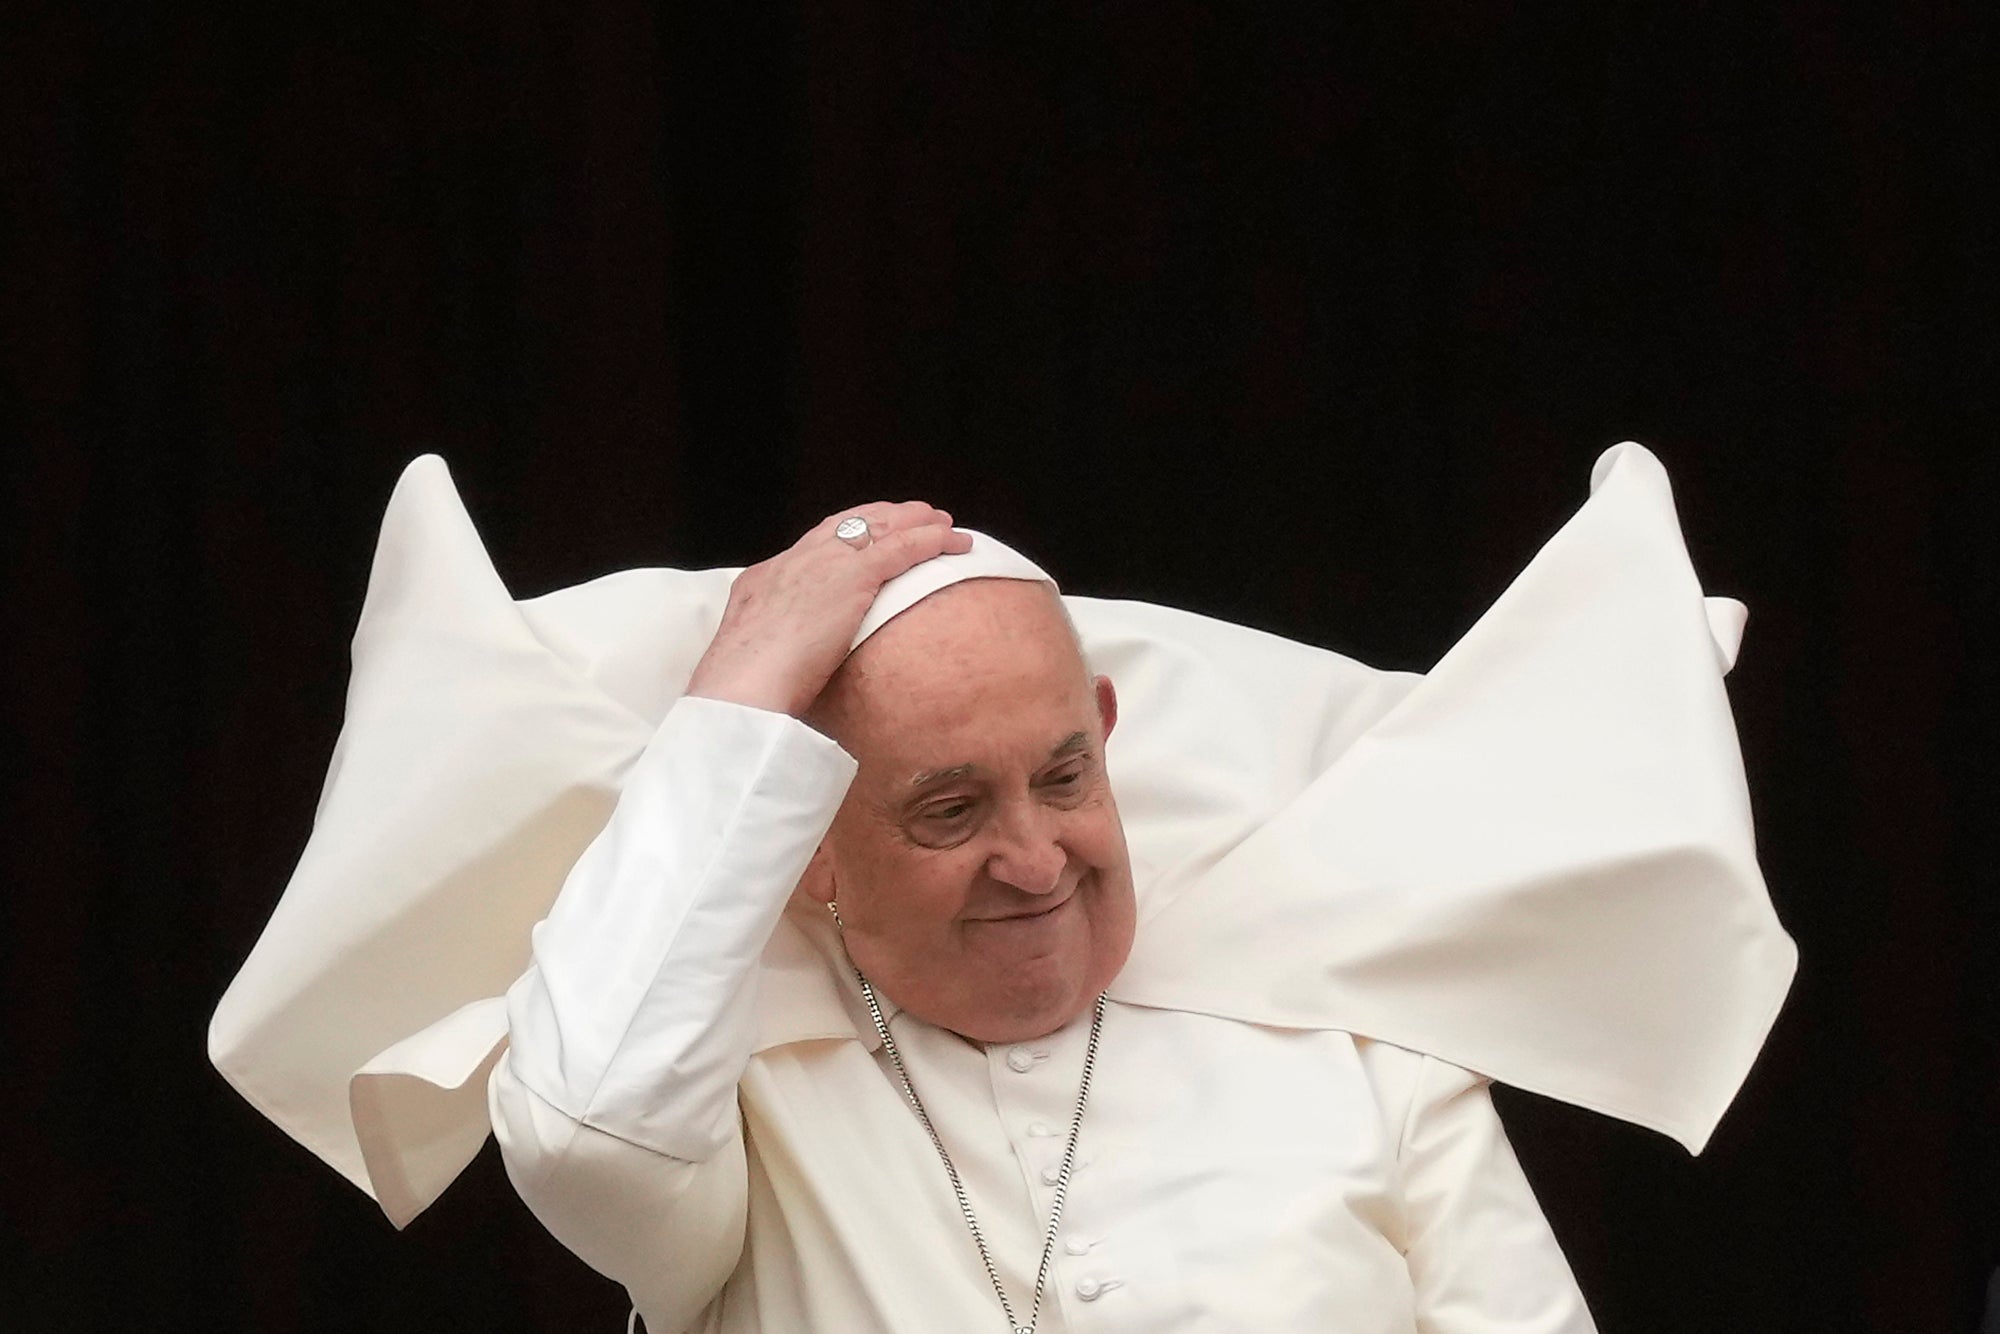 Pope Francis holds his skull cap to prevent it blowing in the wind